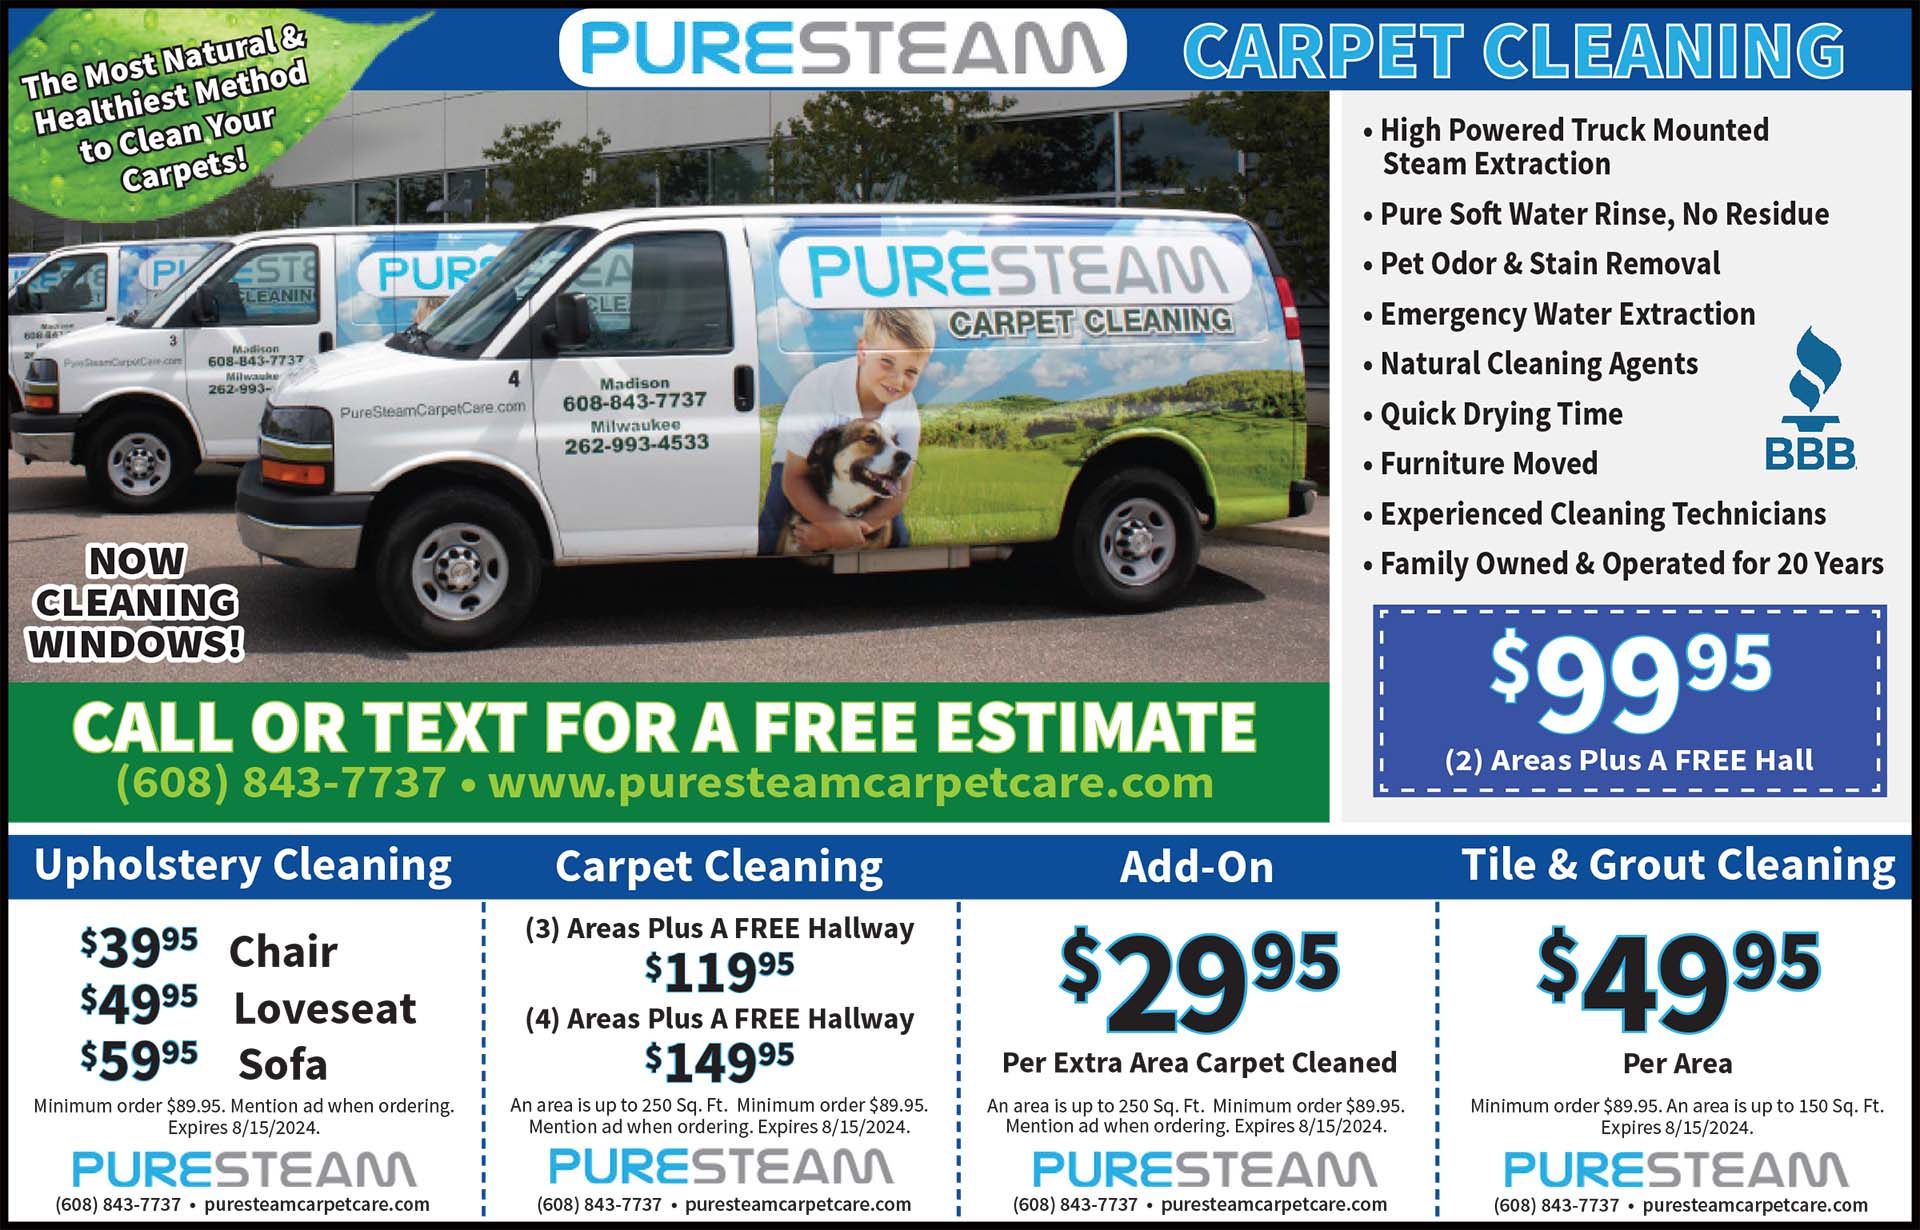 PureSteam Carpet Cleaning Coupons